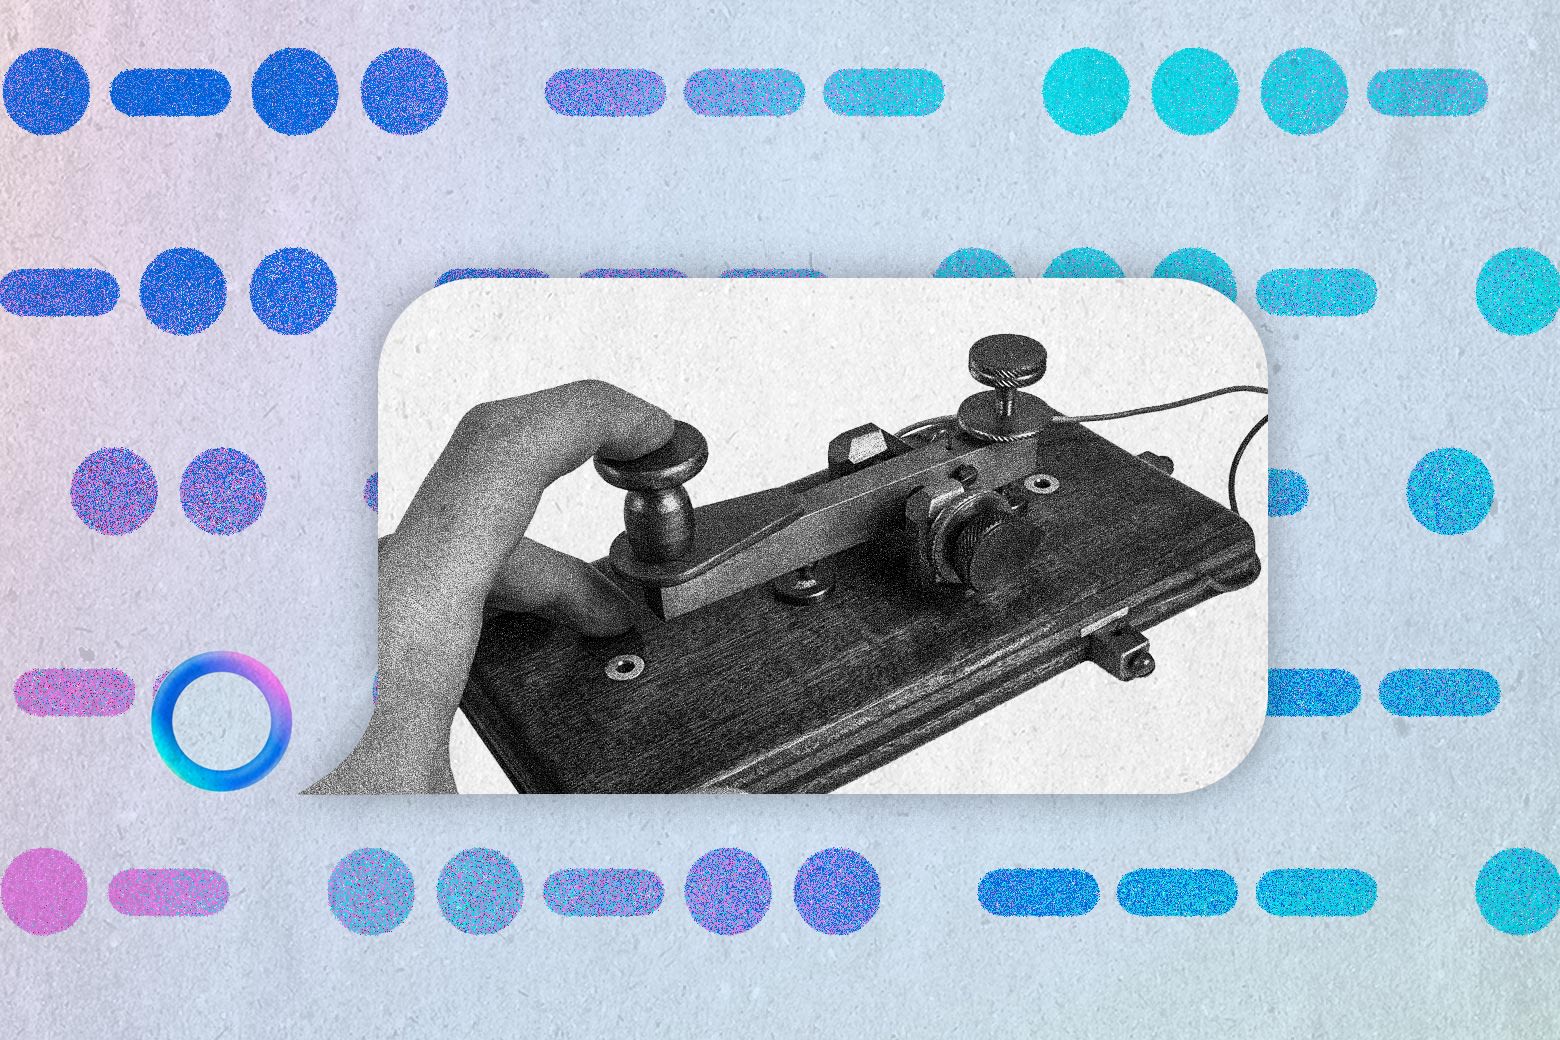 What Mark Zuckerberg Should Learn From Horny 19th-Century Telegraph Operators